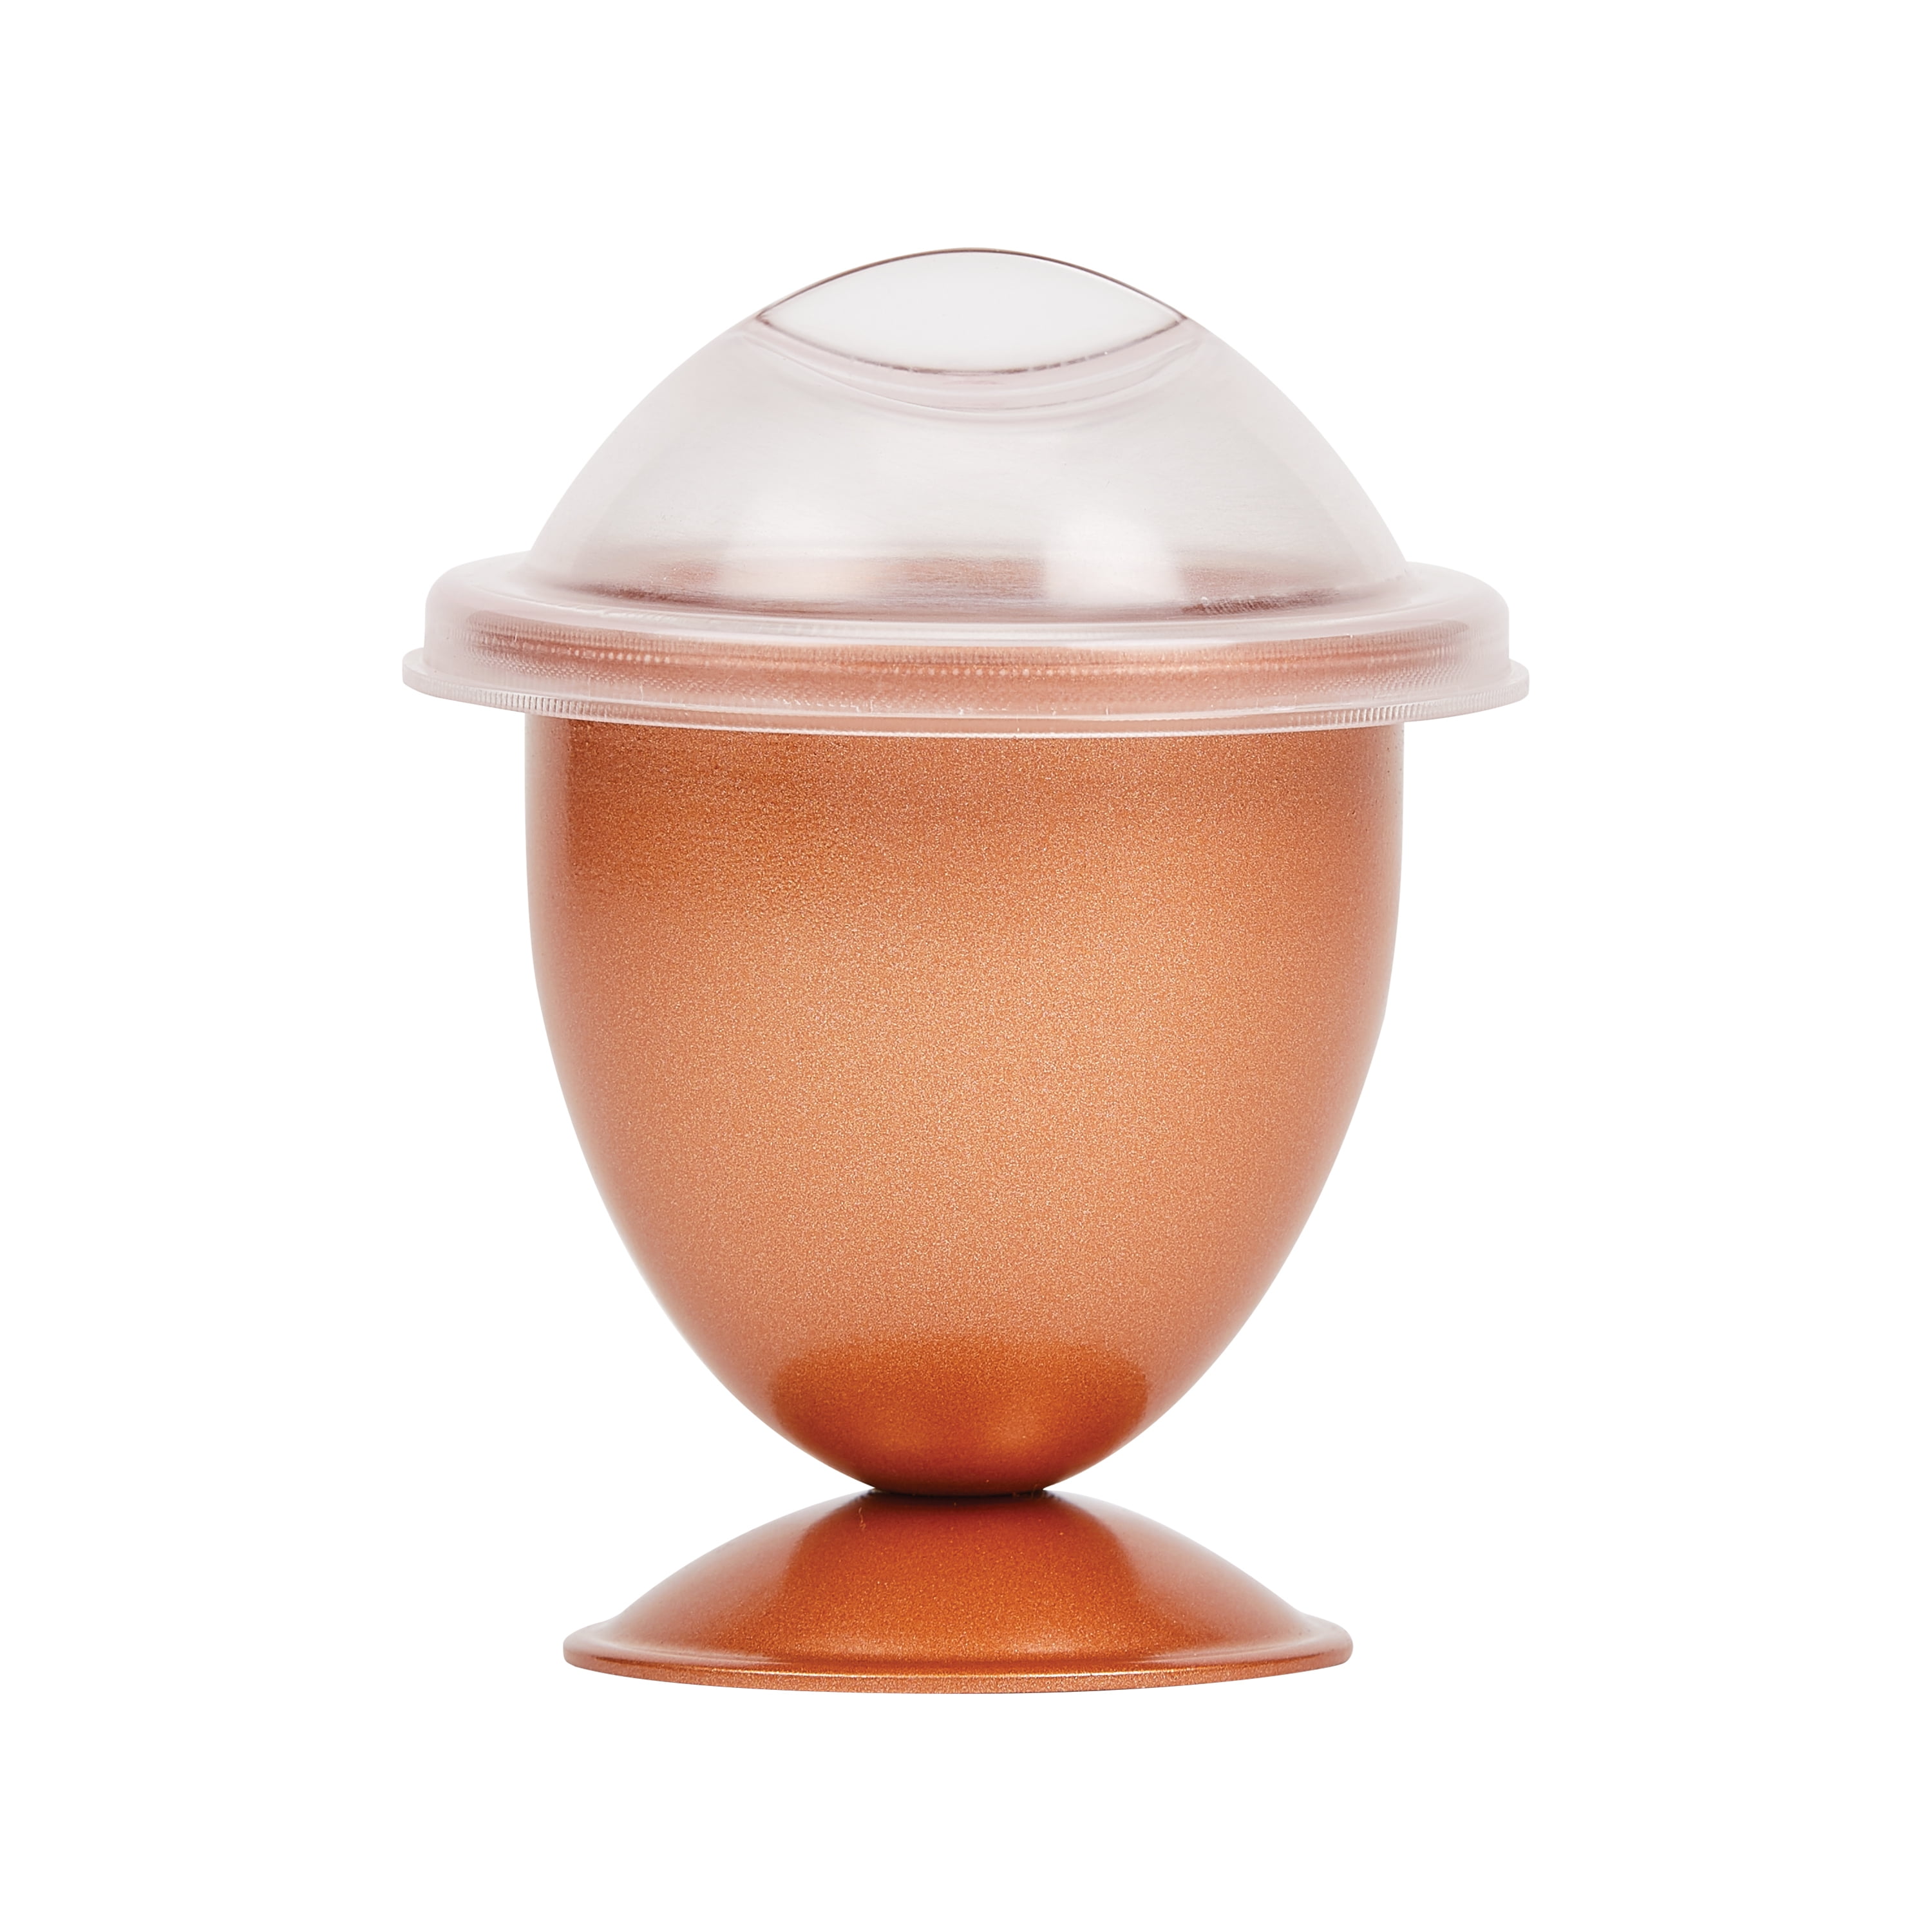 Copper Chef Deluxe Perfect Egg Maker on QVC 